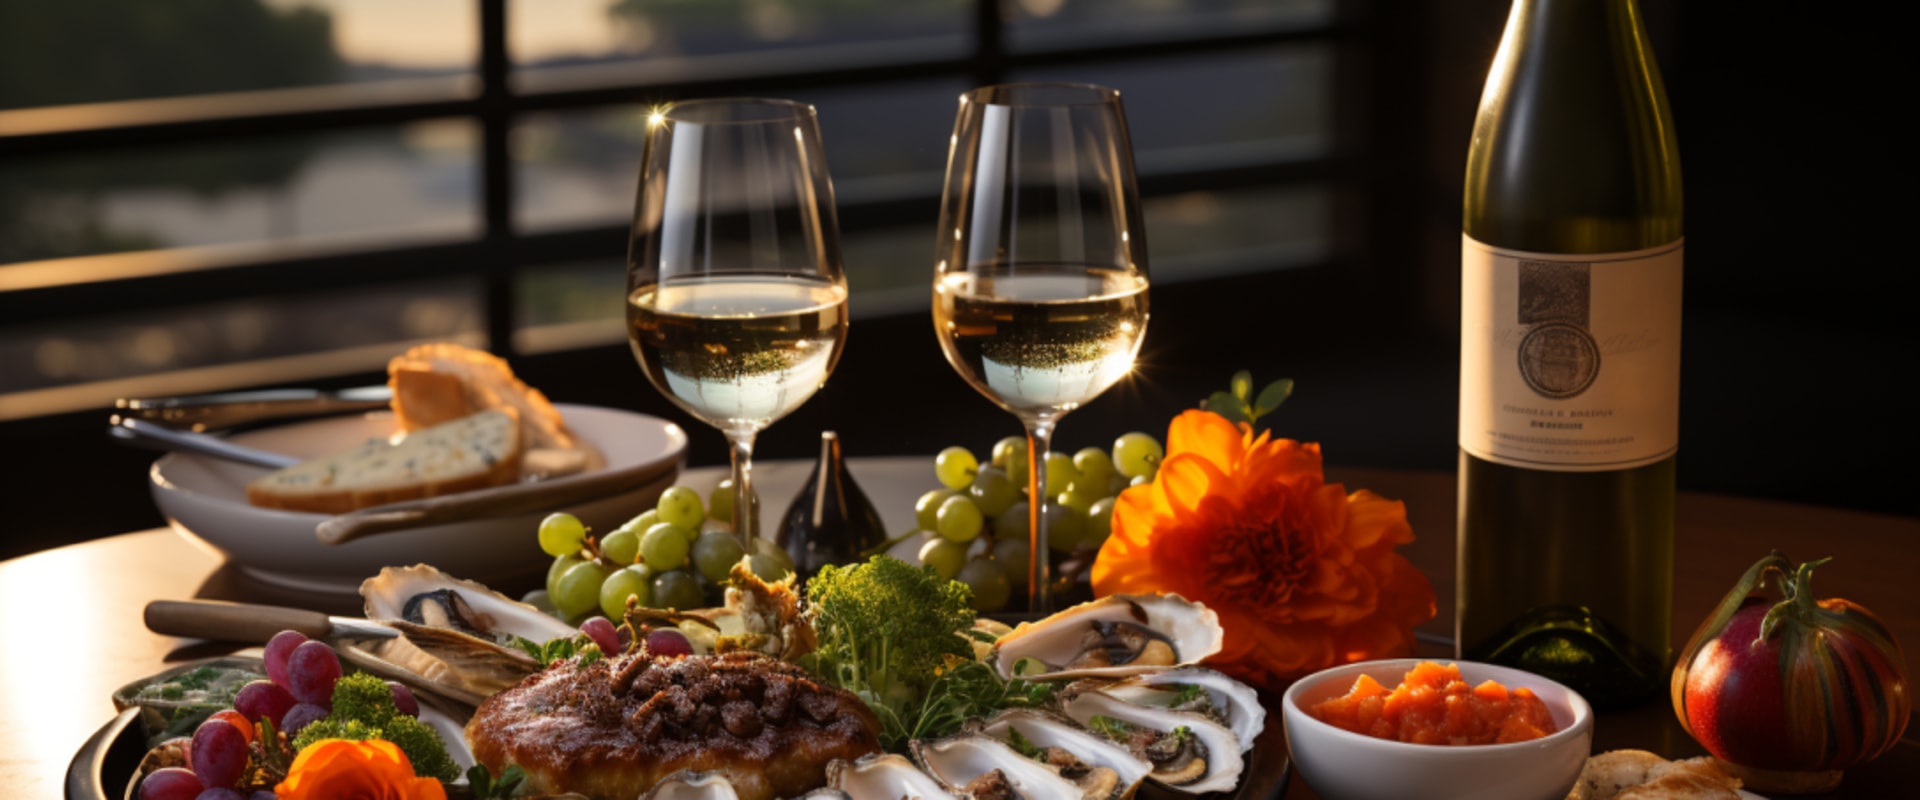 Perfect Pairings: Abalone, Wine & Side Dishes for an Exquisite Meal